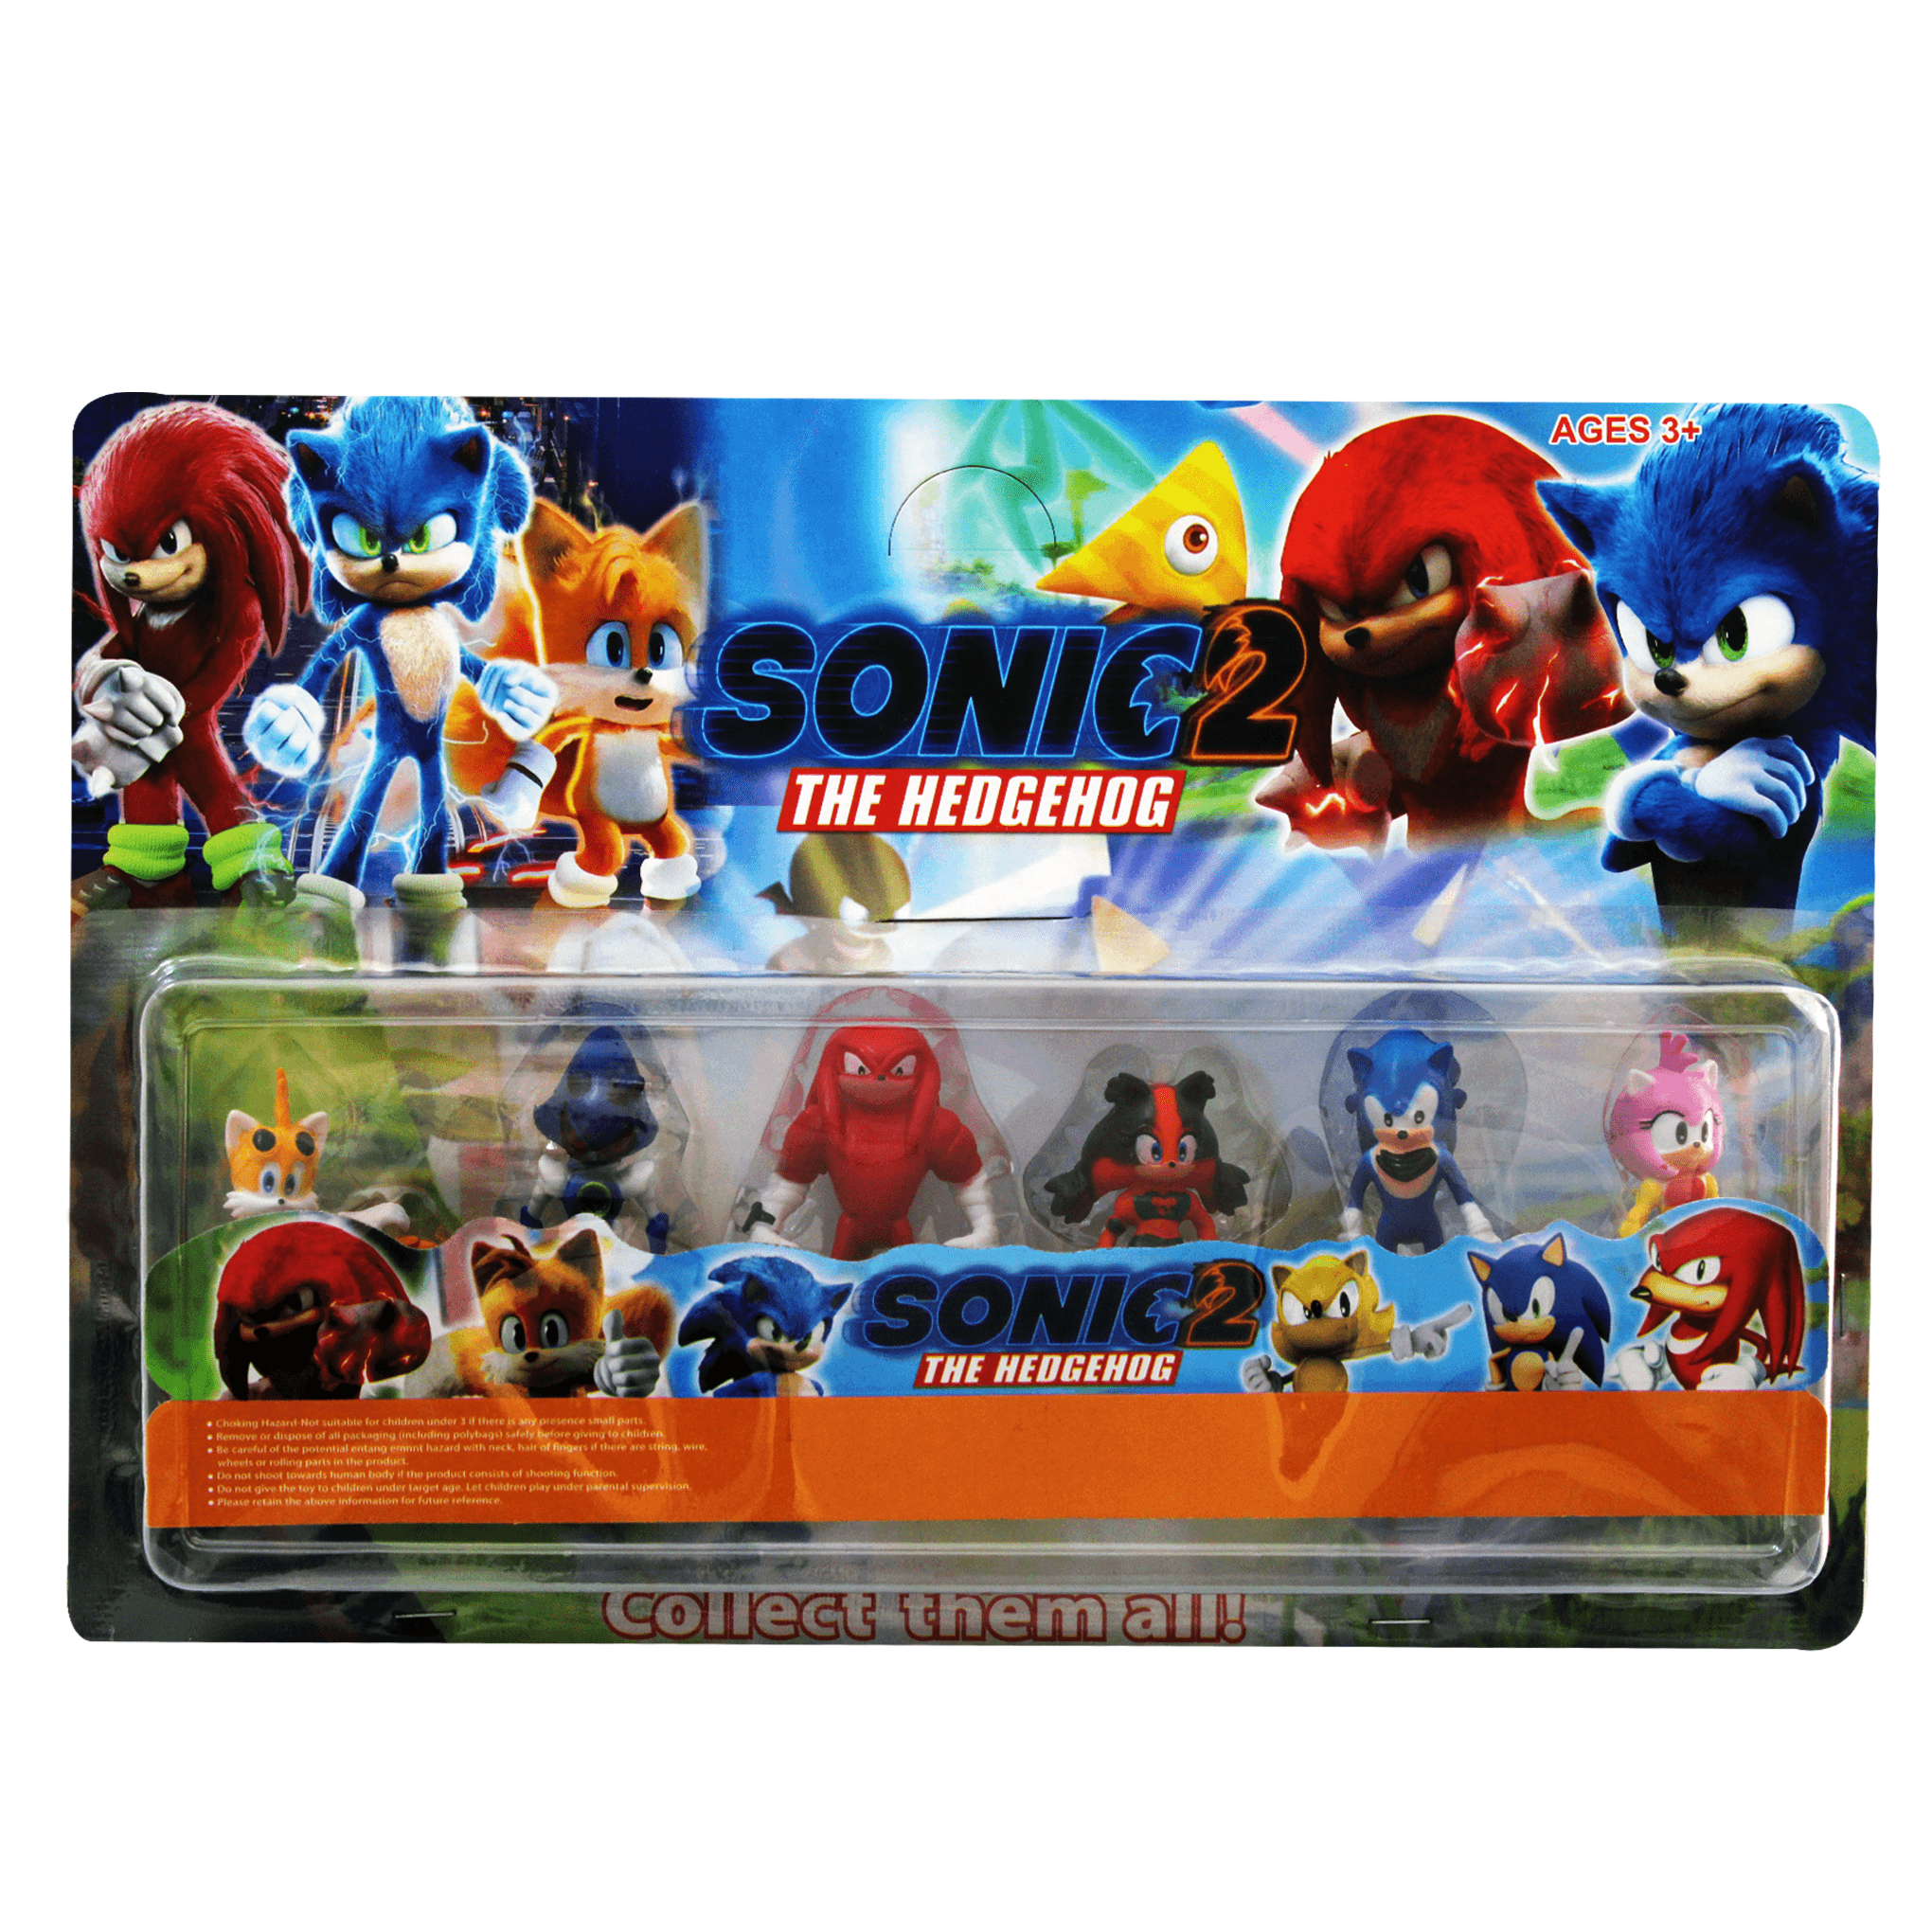 6 in 1 Sonic Action Figures Set Model B - BumbleToys - 5-7 Years, Action Figure, Action Figures, Boys, Sonic, Toy Land